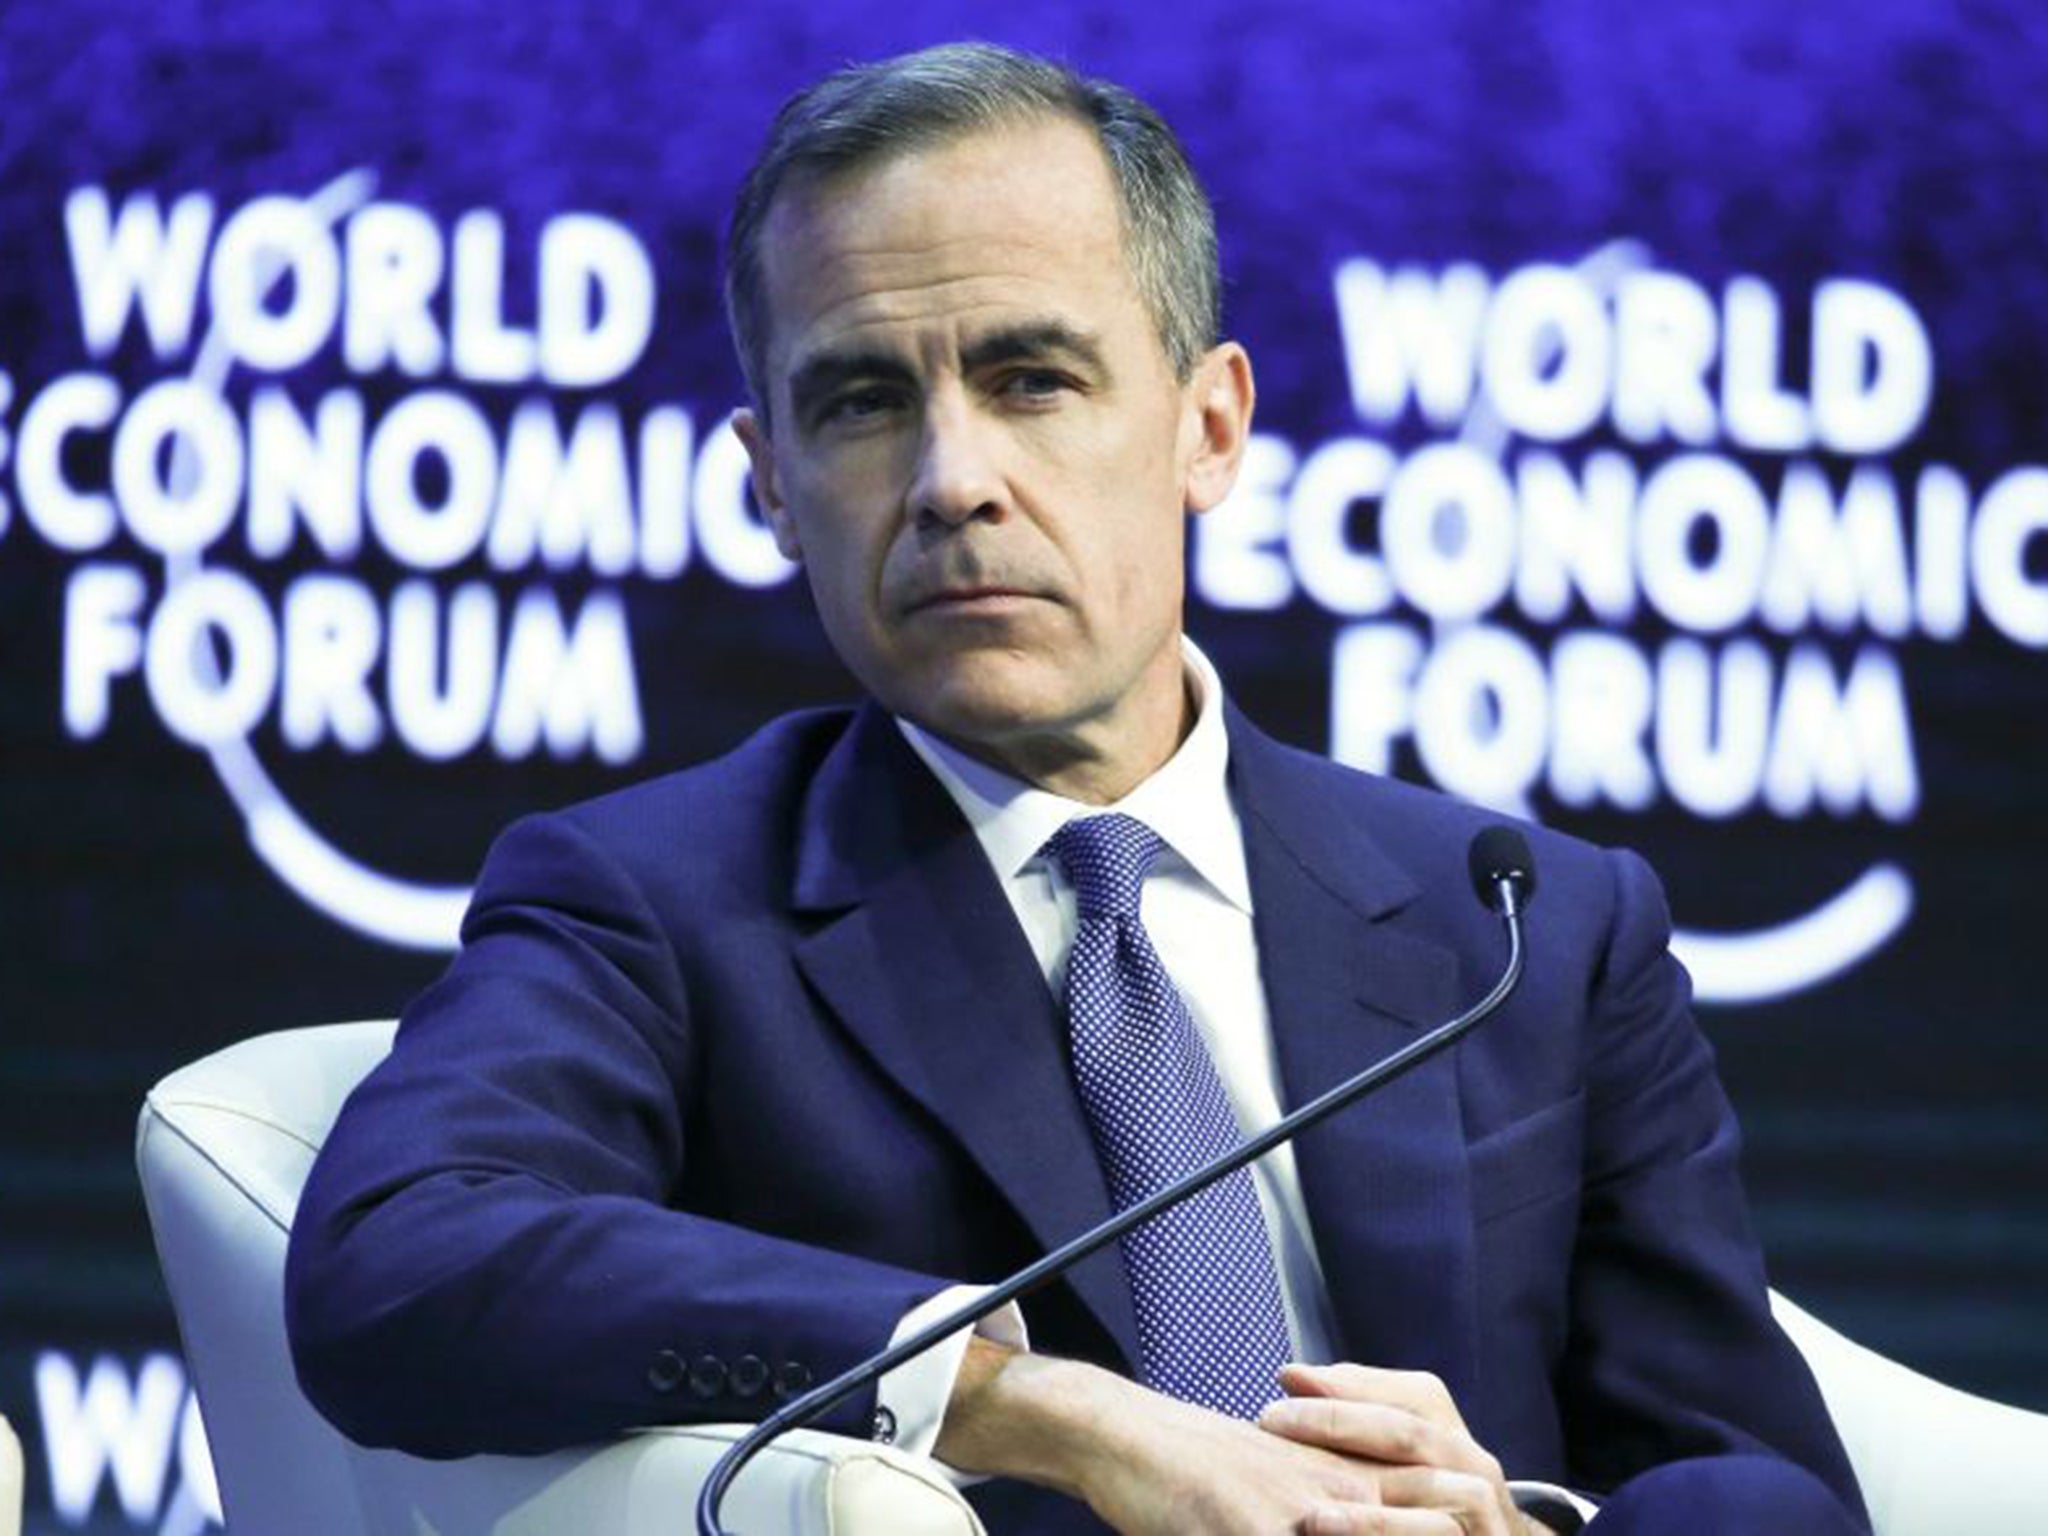 Bank of England Governor Mark Carney in Davos on Saturday